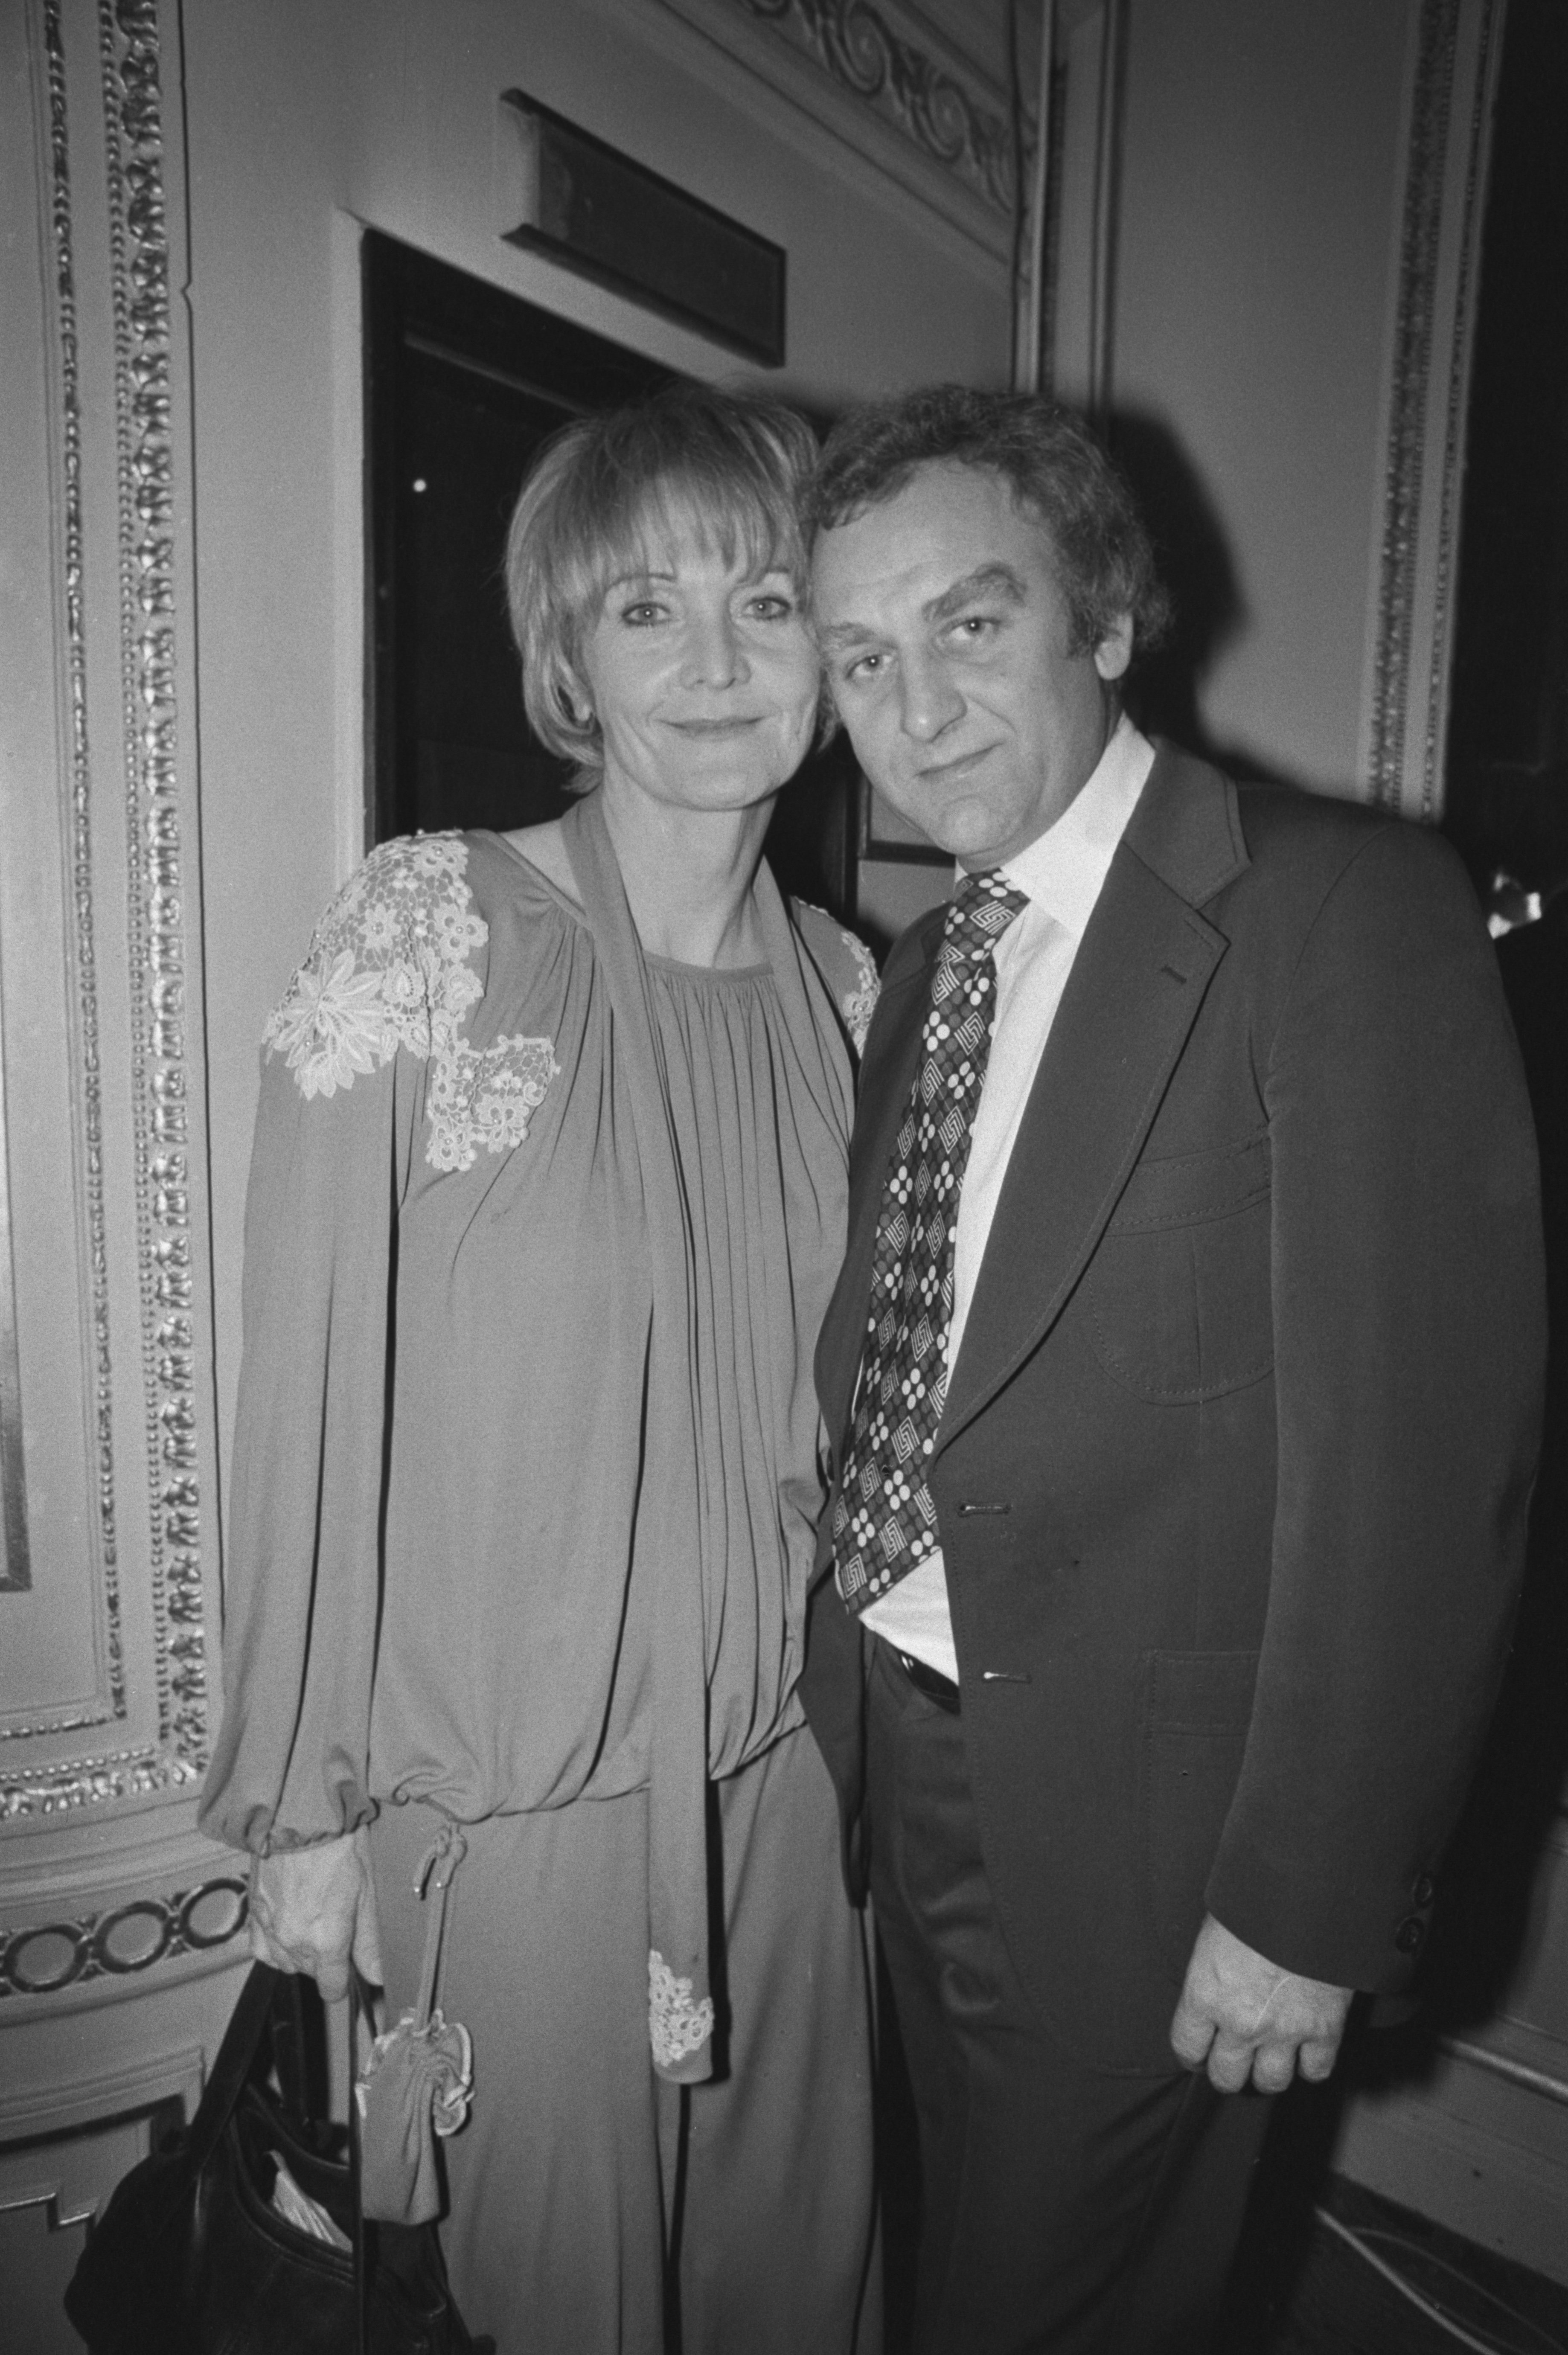 Sheila Hancock and her husband, British actor John Thaw (1942-2002), in London, England, in December 1976 | Photo: Getty Images